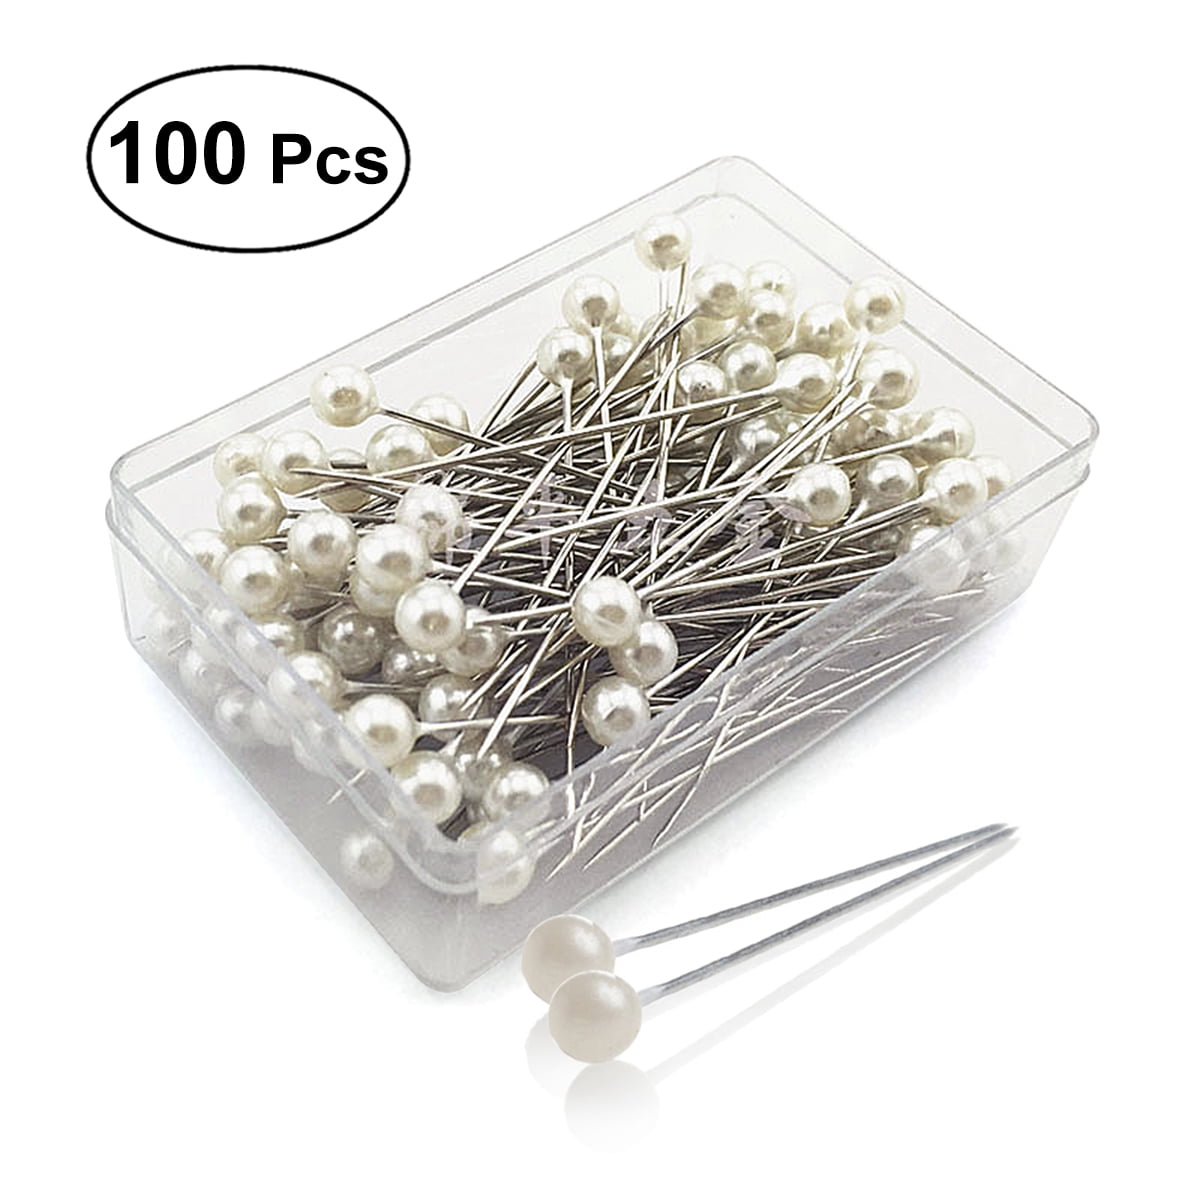 300pcs Round Head Pin,Sewing Weddings Corsage Dressmaking Pearl Head Pin,DIY Straight Quilting Ball Pins Fixed Marking Practical Tool Black 